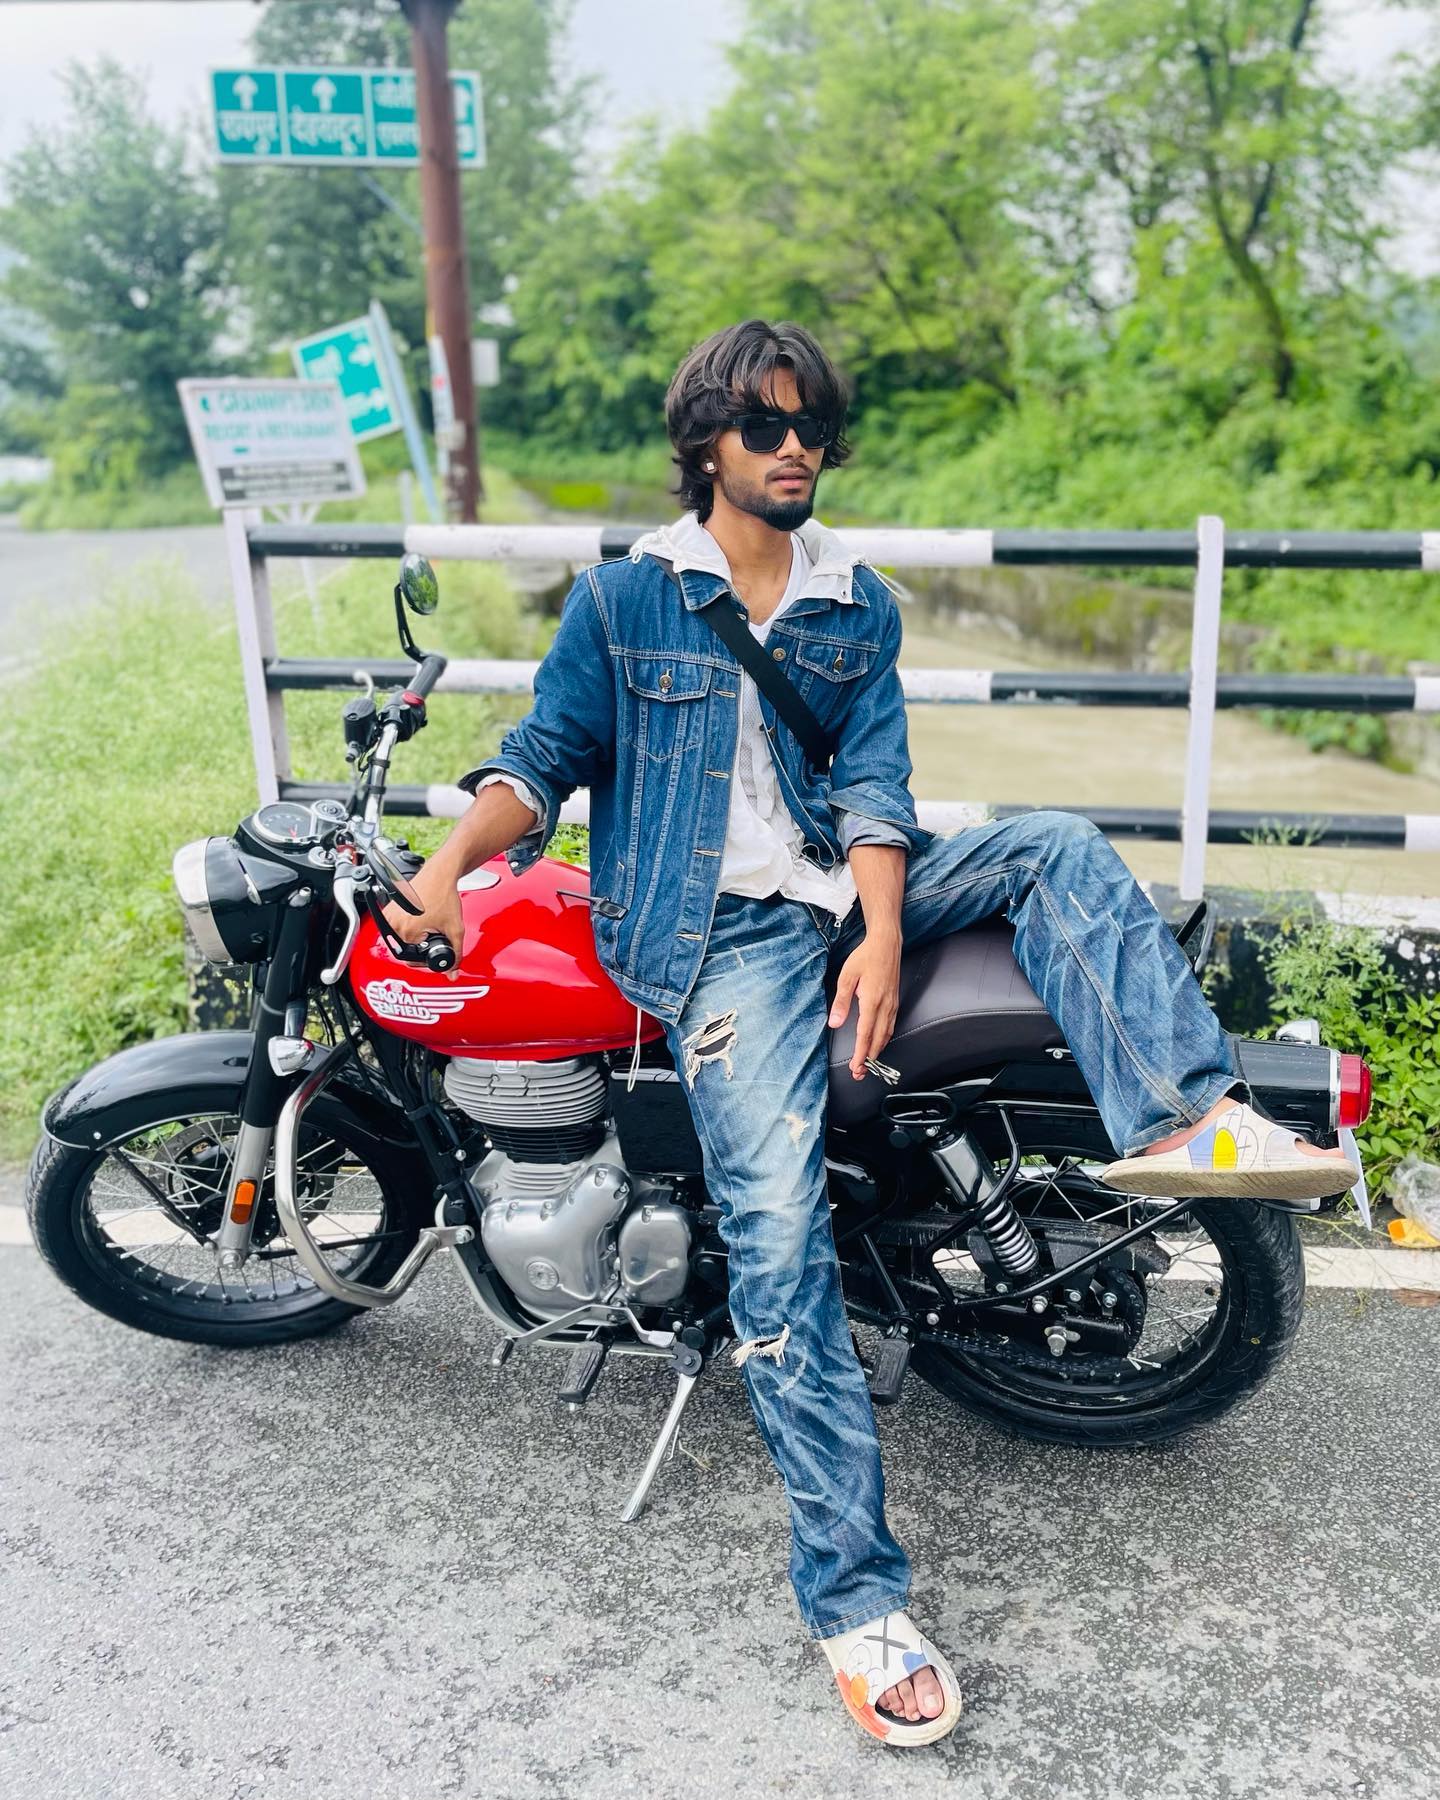 A man standing next to a motorcycle on a road photo – Free Royal enfield  Image on Unsplash